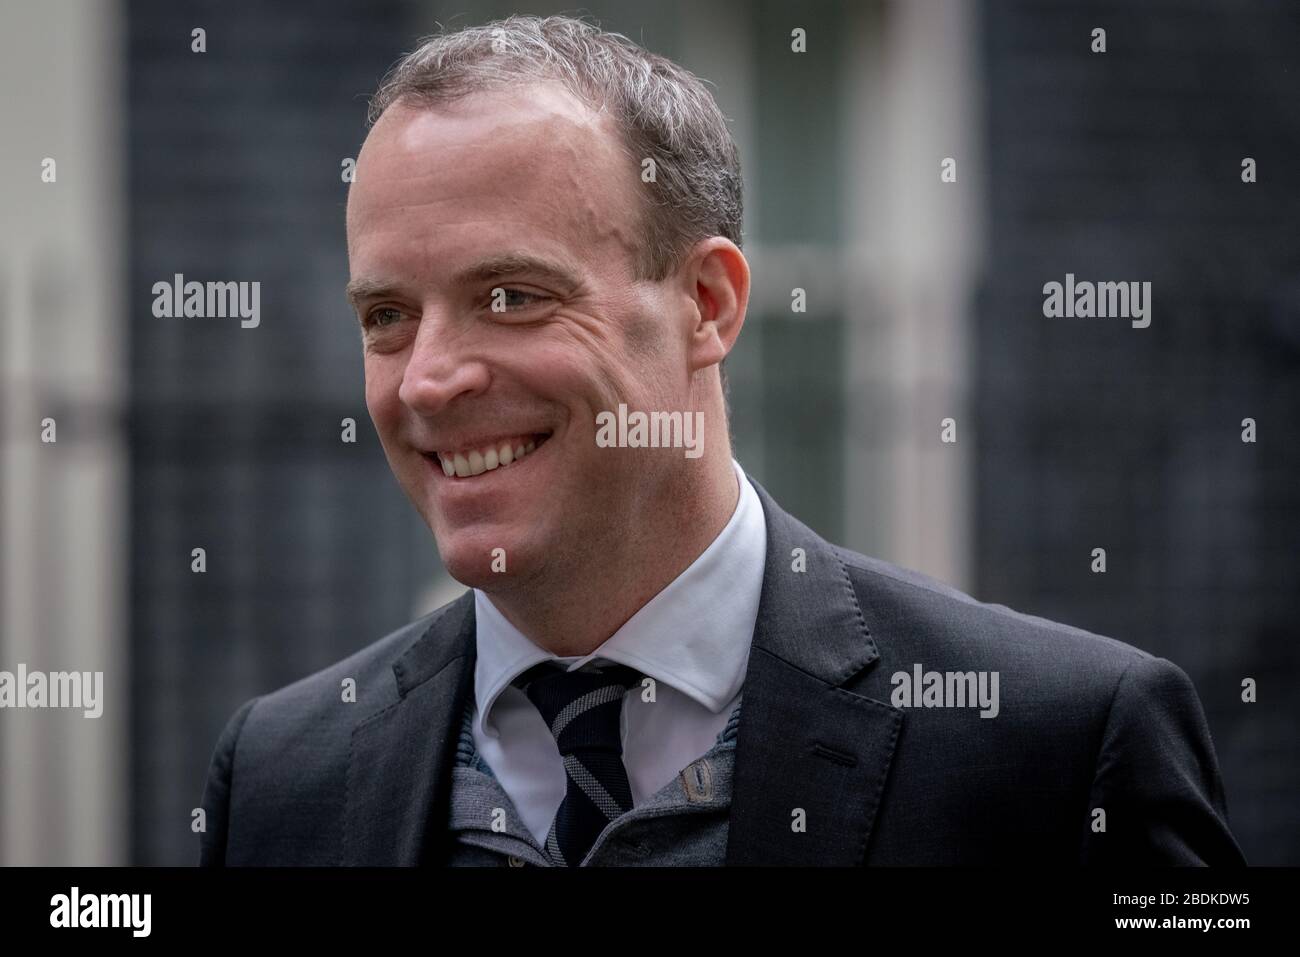 Dominic Raab, MP for Esher and Walton and Foreign Secretary & First Secretary of State arrives at Downing Street on the day of the Budget, London, UK. Stock Photo